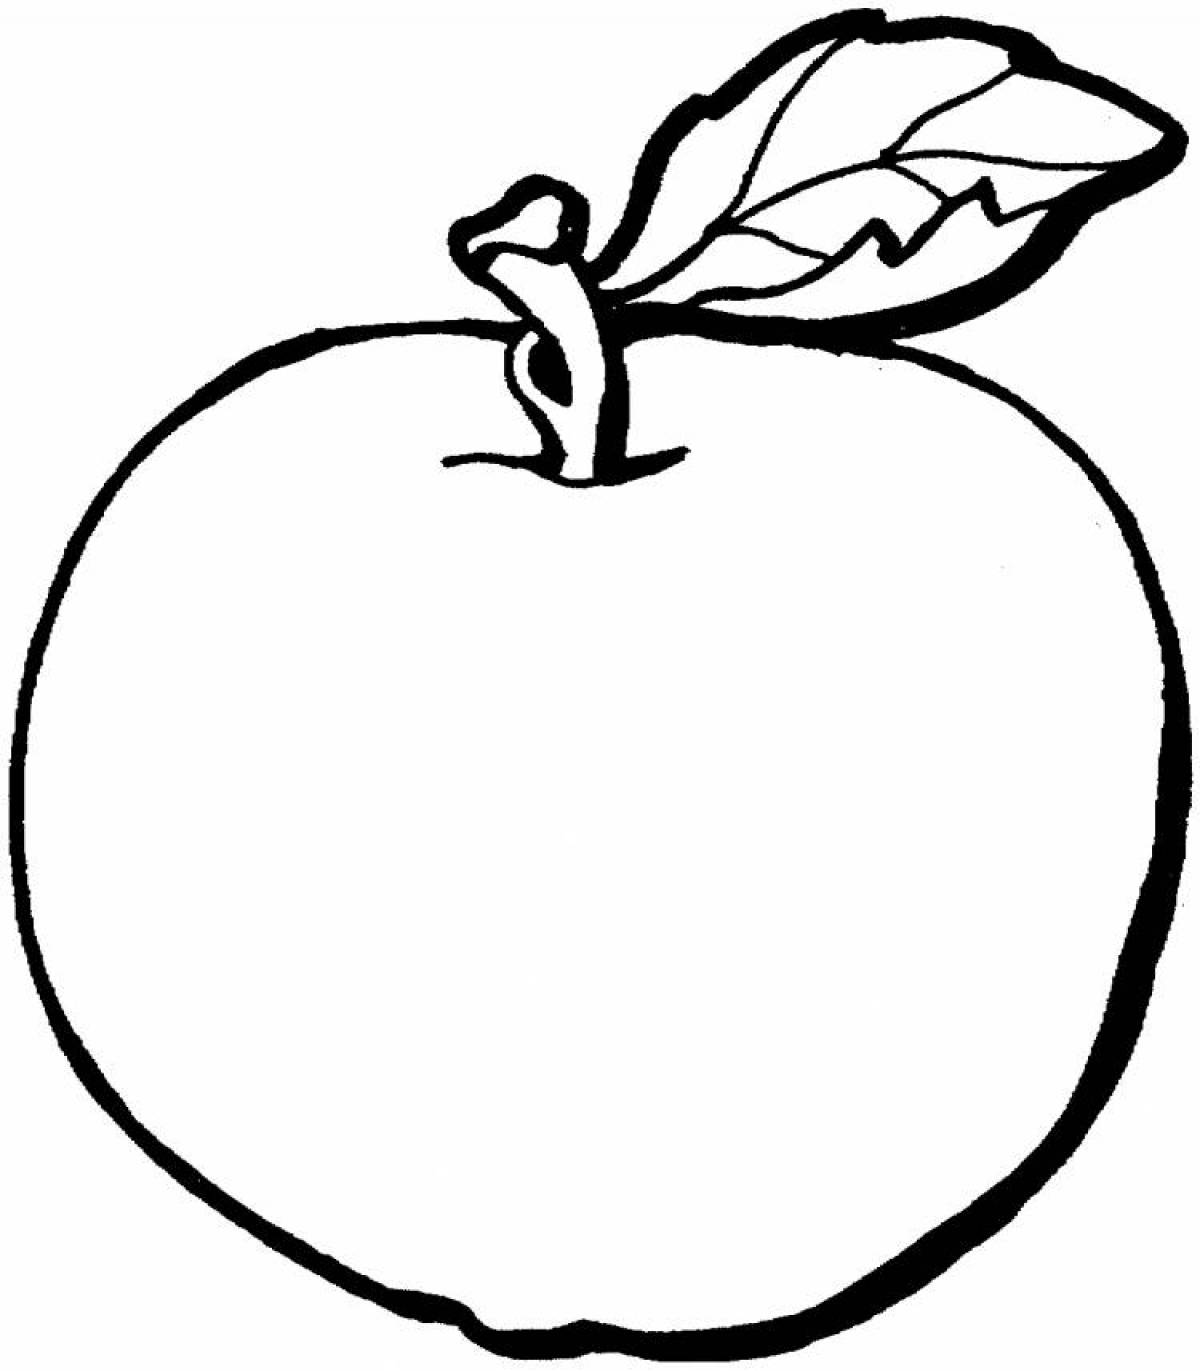 Playful apple coloring book for kids